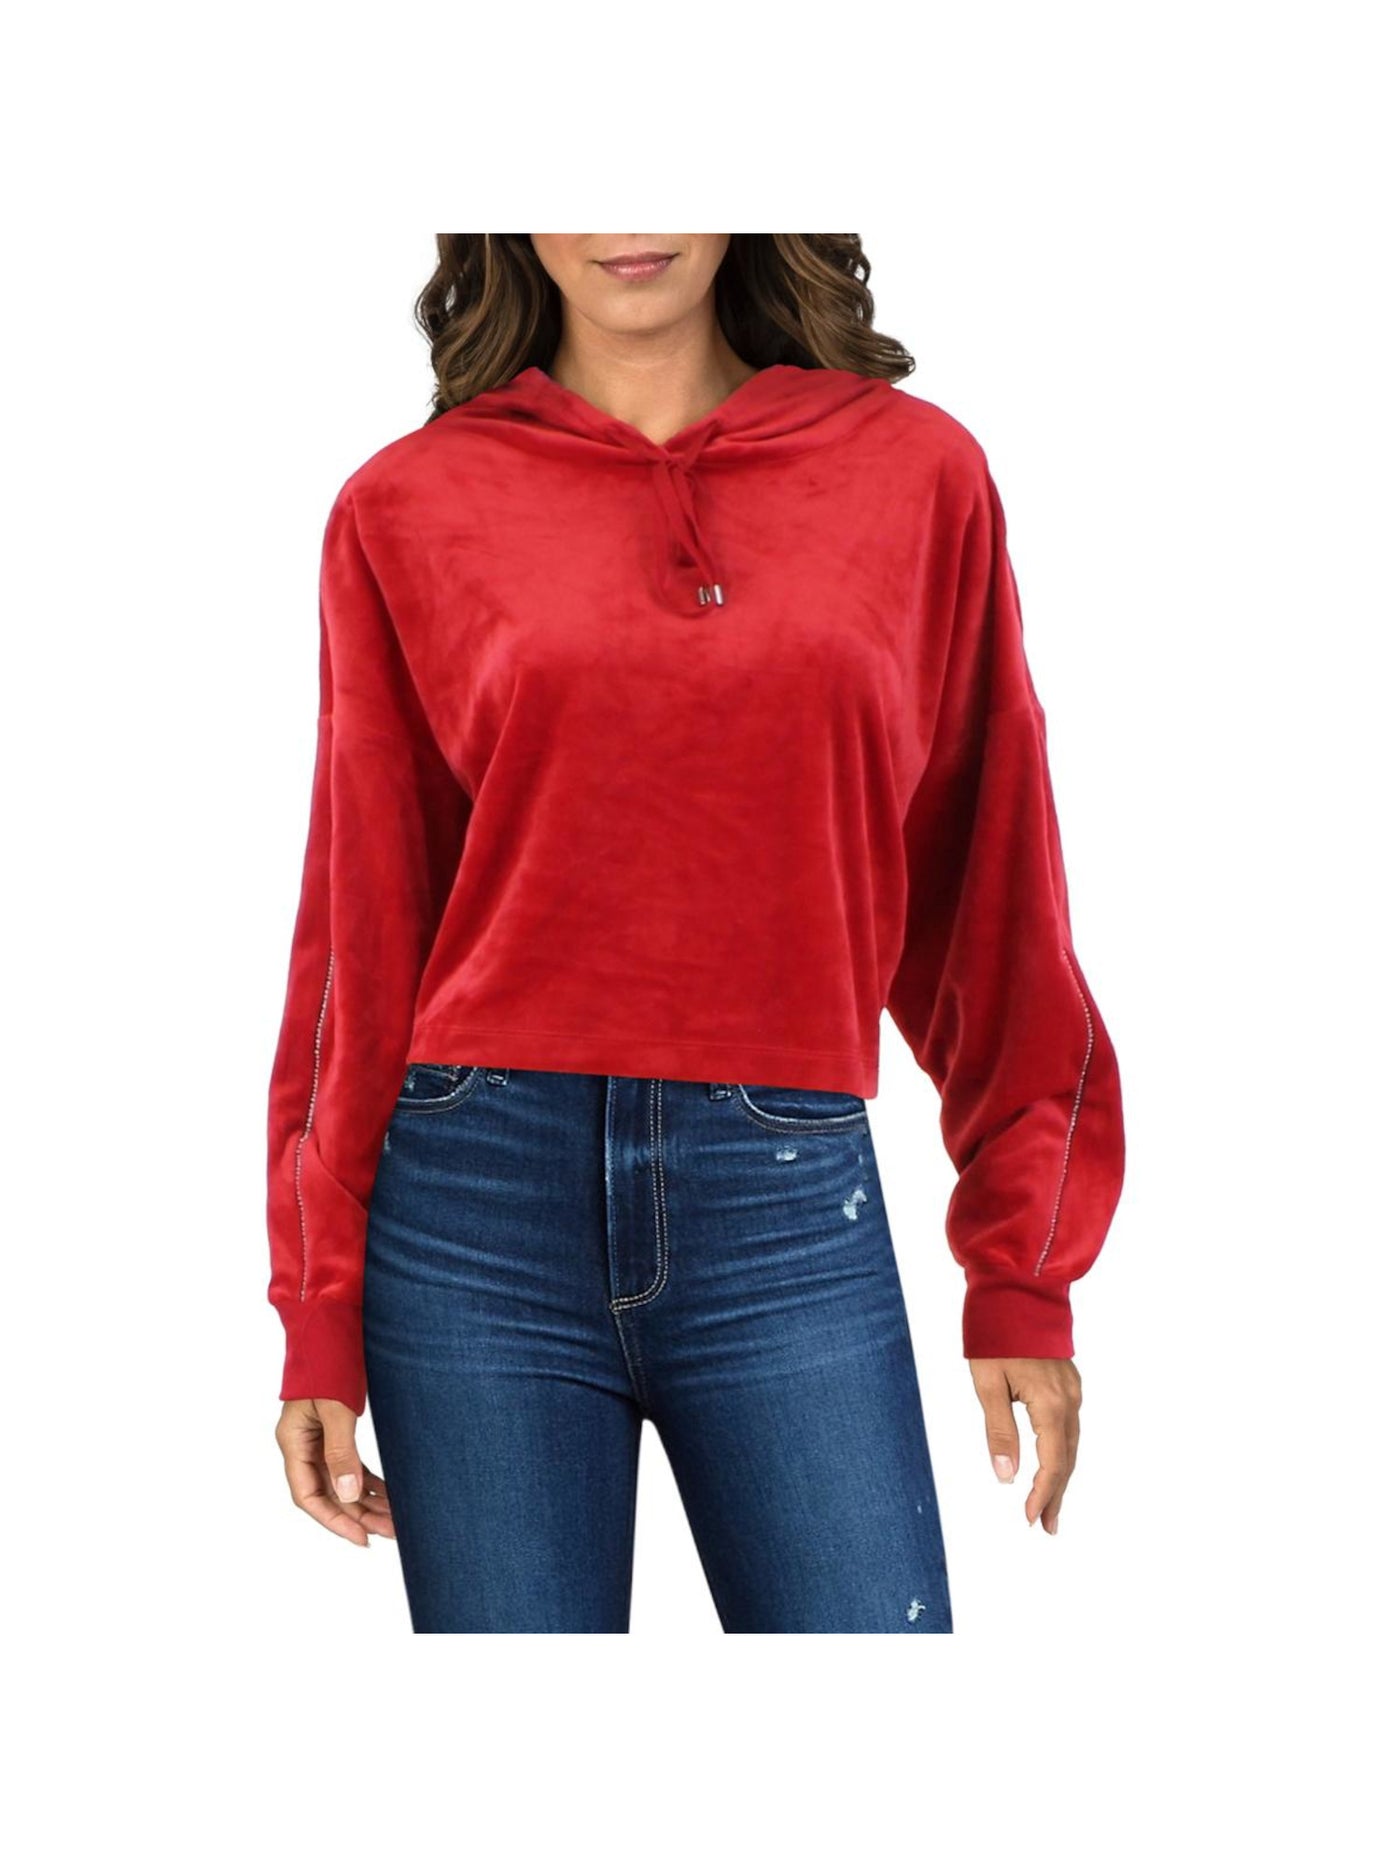 DKNY Womens Red Embellished Short Length Drawstring Pull-over Long Sleeve Hoodie Top L